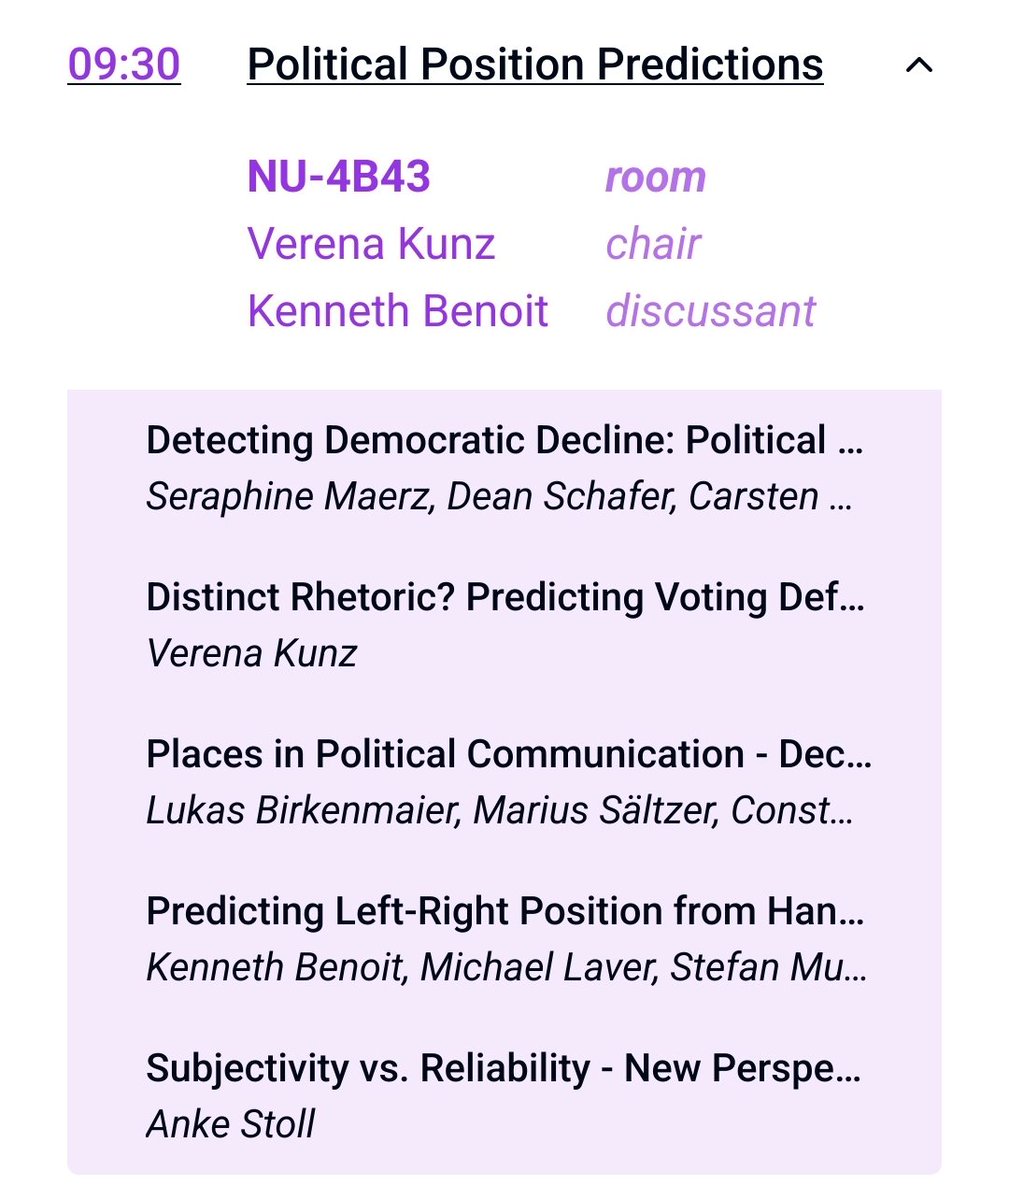 Had a great time @COMPTEXTCONF presenting 'Detecting Democratic Decline: Political Leaders Public Speech as an Early Warning Signal' our work with @SeraphineMaerz and @CarstenQSchneid where we develop the Illiberal Speech Index. And, learned a lot about text analysis and LLMs!